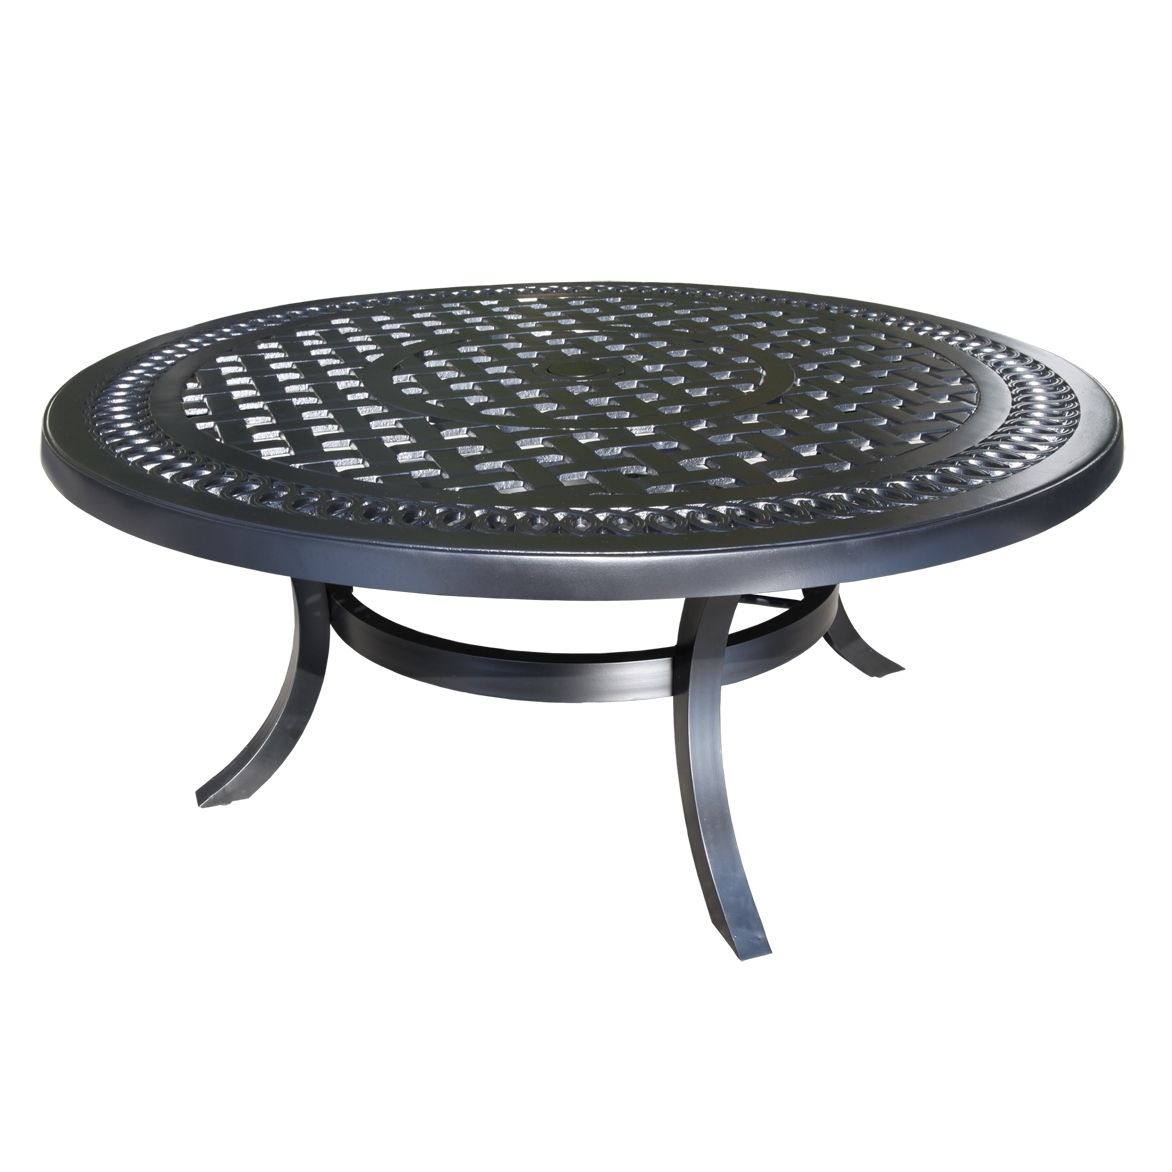 2019 Engaging Outdoor Side Table With Umbrella Hole 18 Small Patio Coffee Throughout Patio Umbrella Side Tables (View 14 of 20)